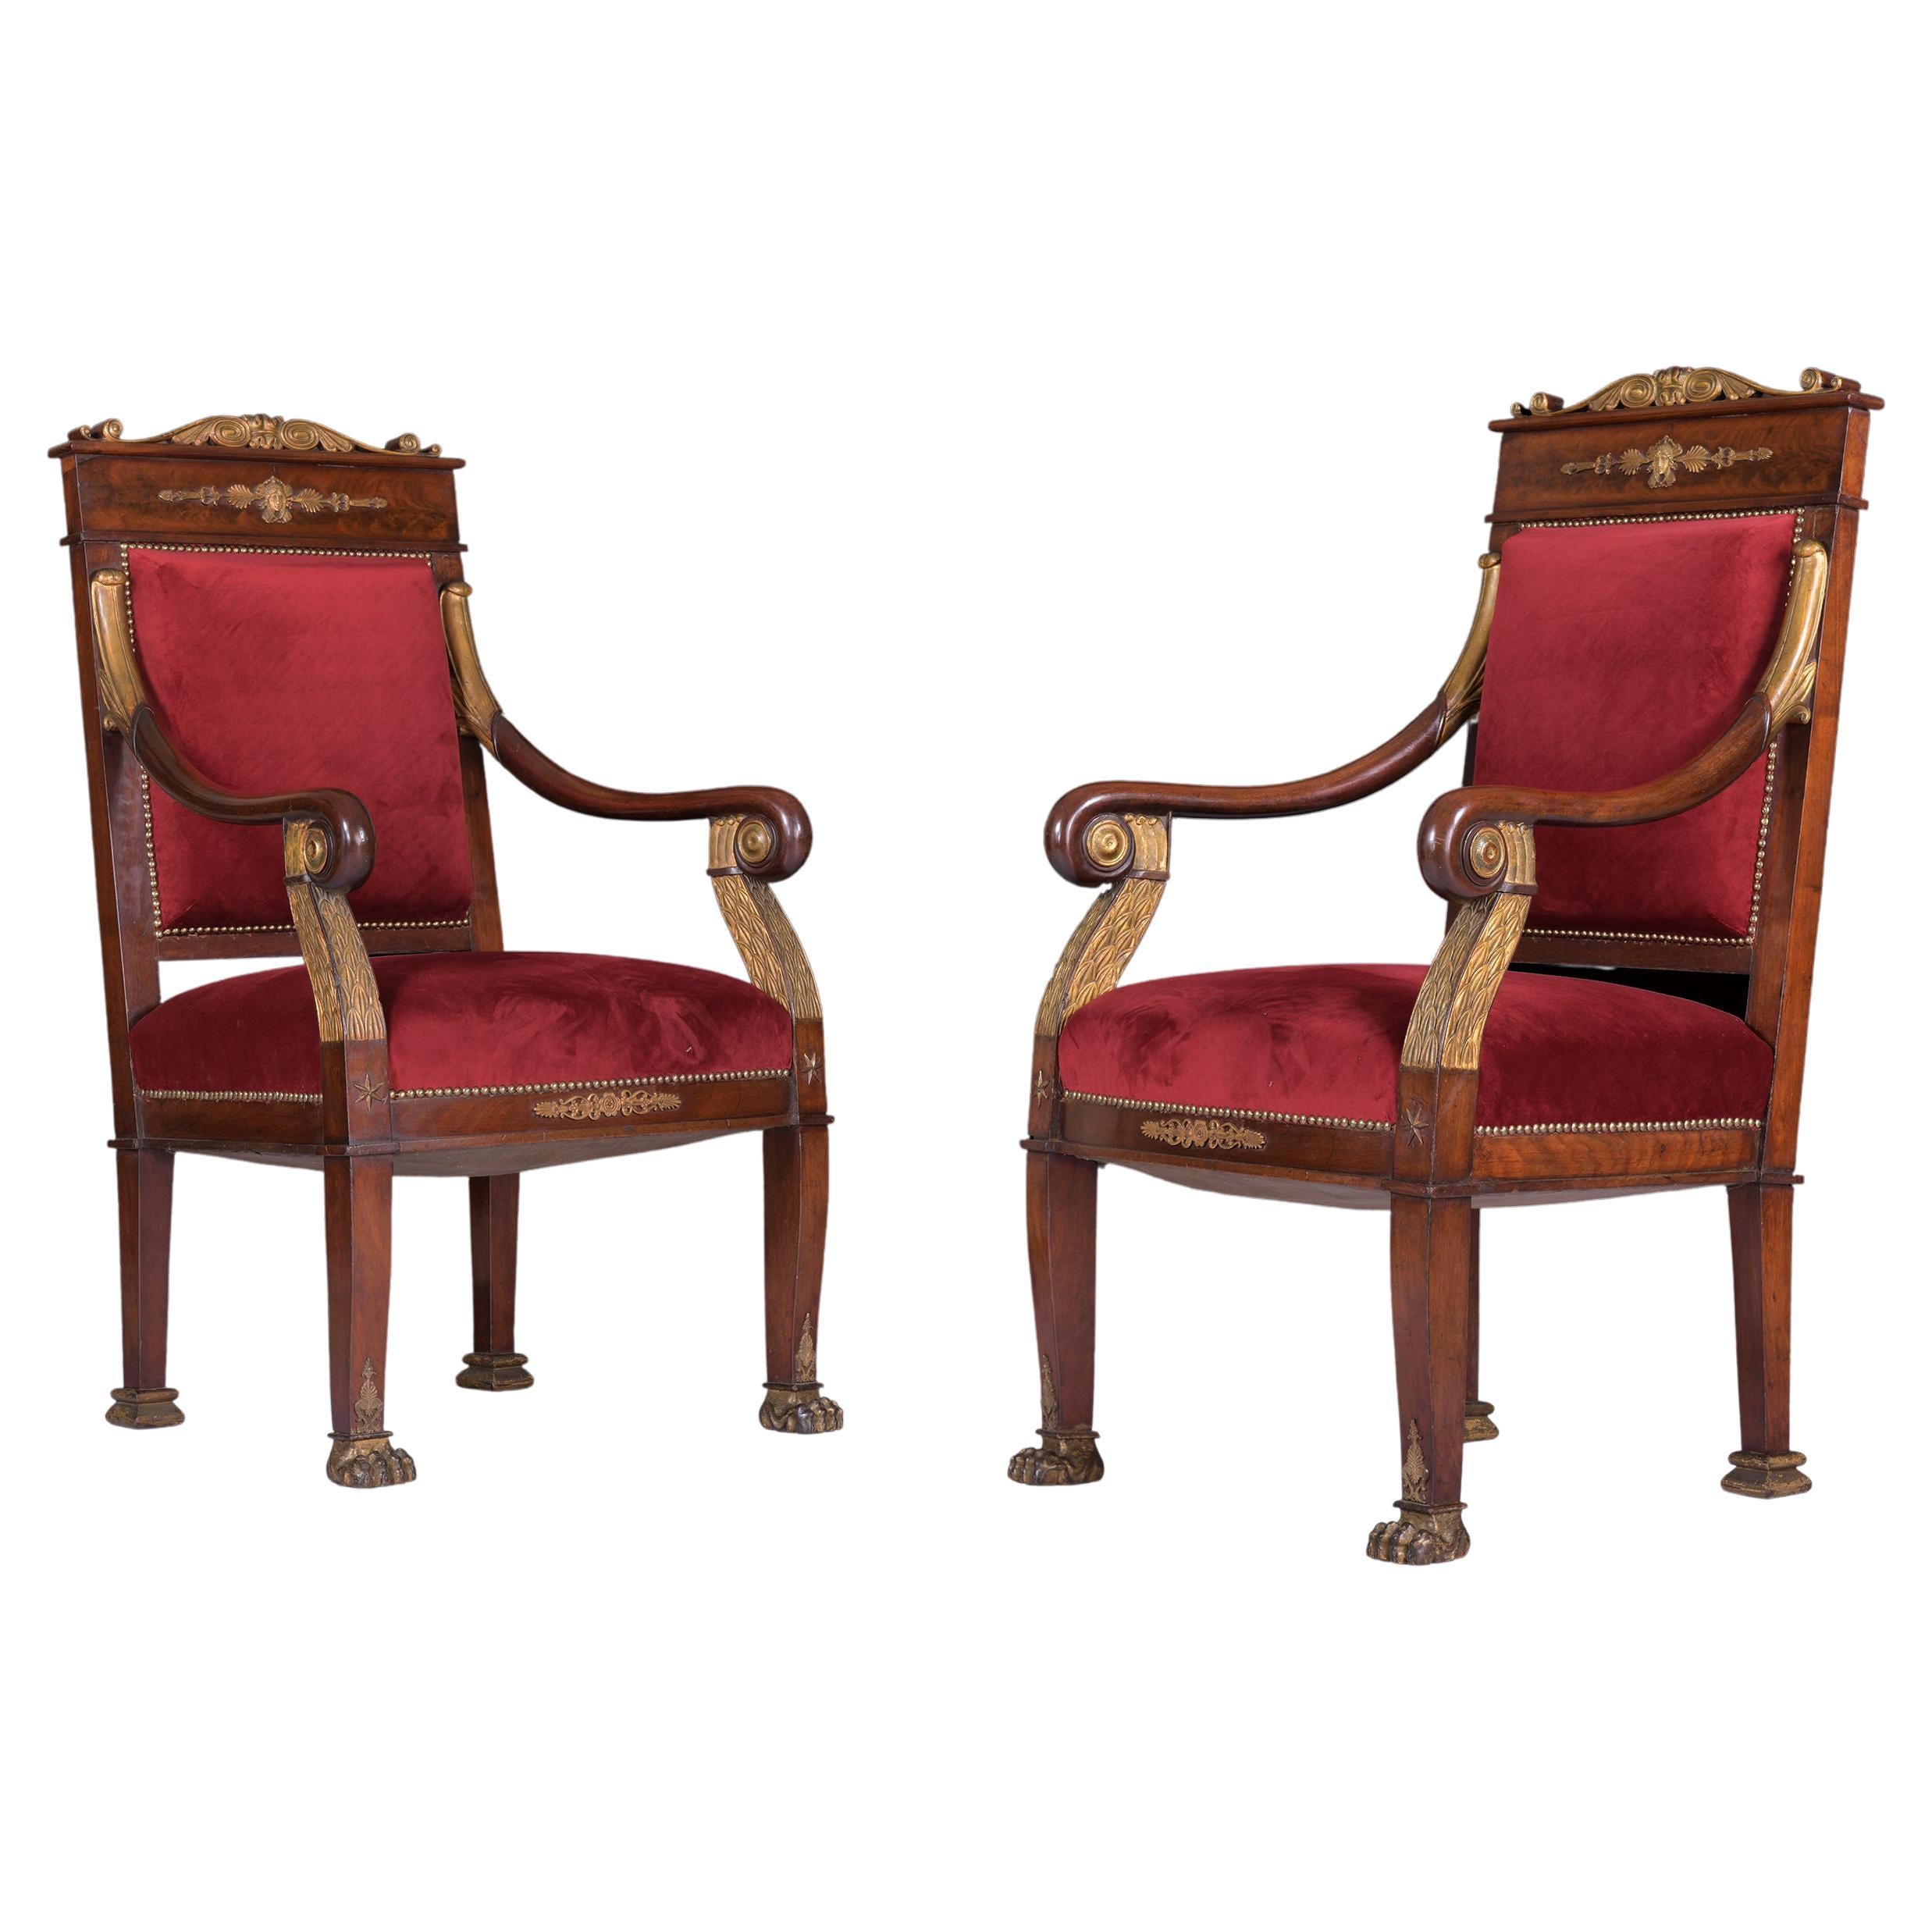 Pair Of Early 19th C French Empire Armchairs In The Manner Of Jacob-Desmalter For Sale